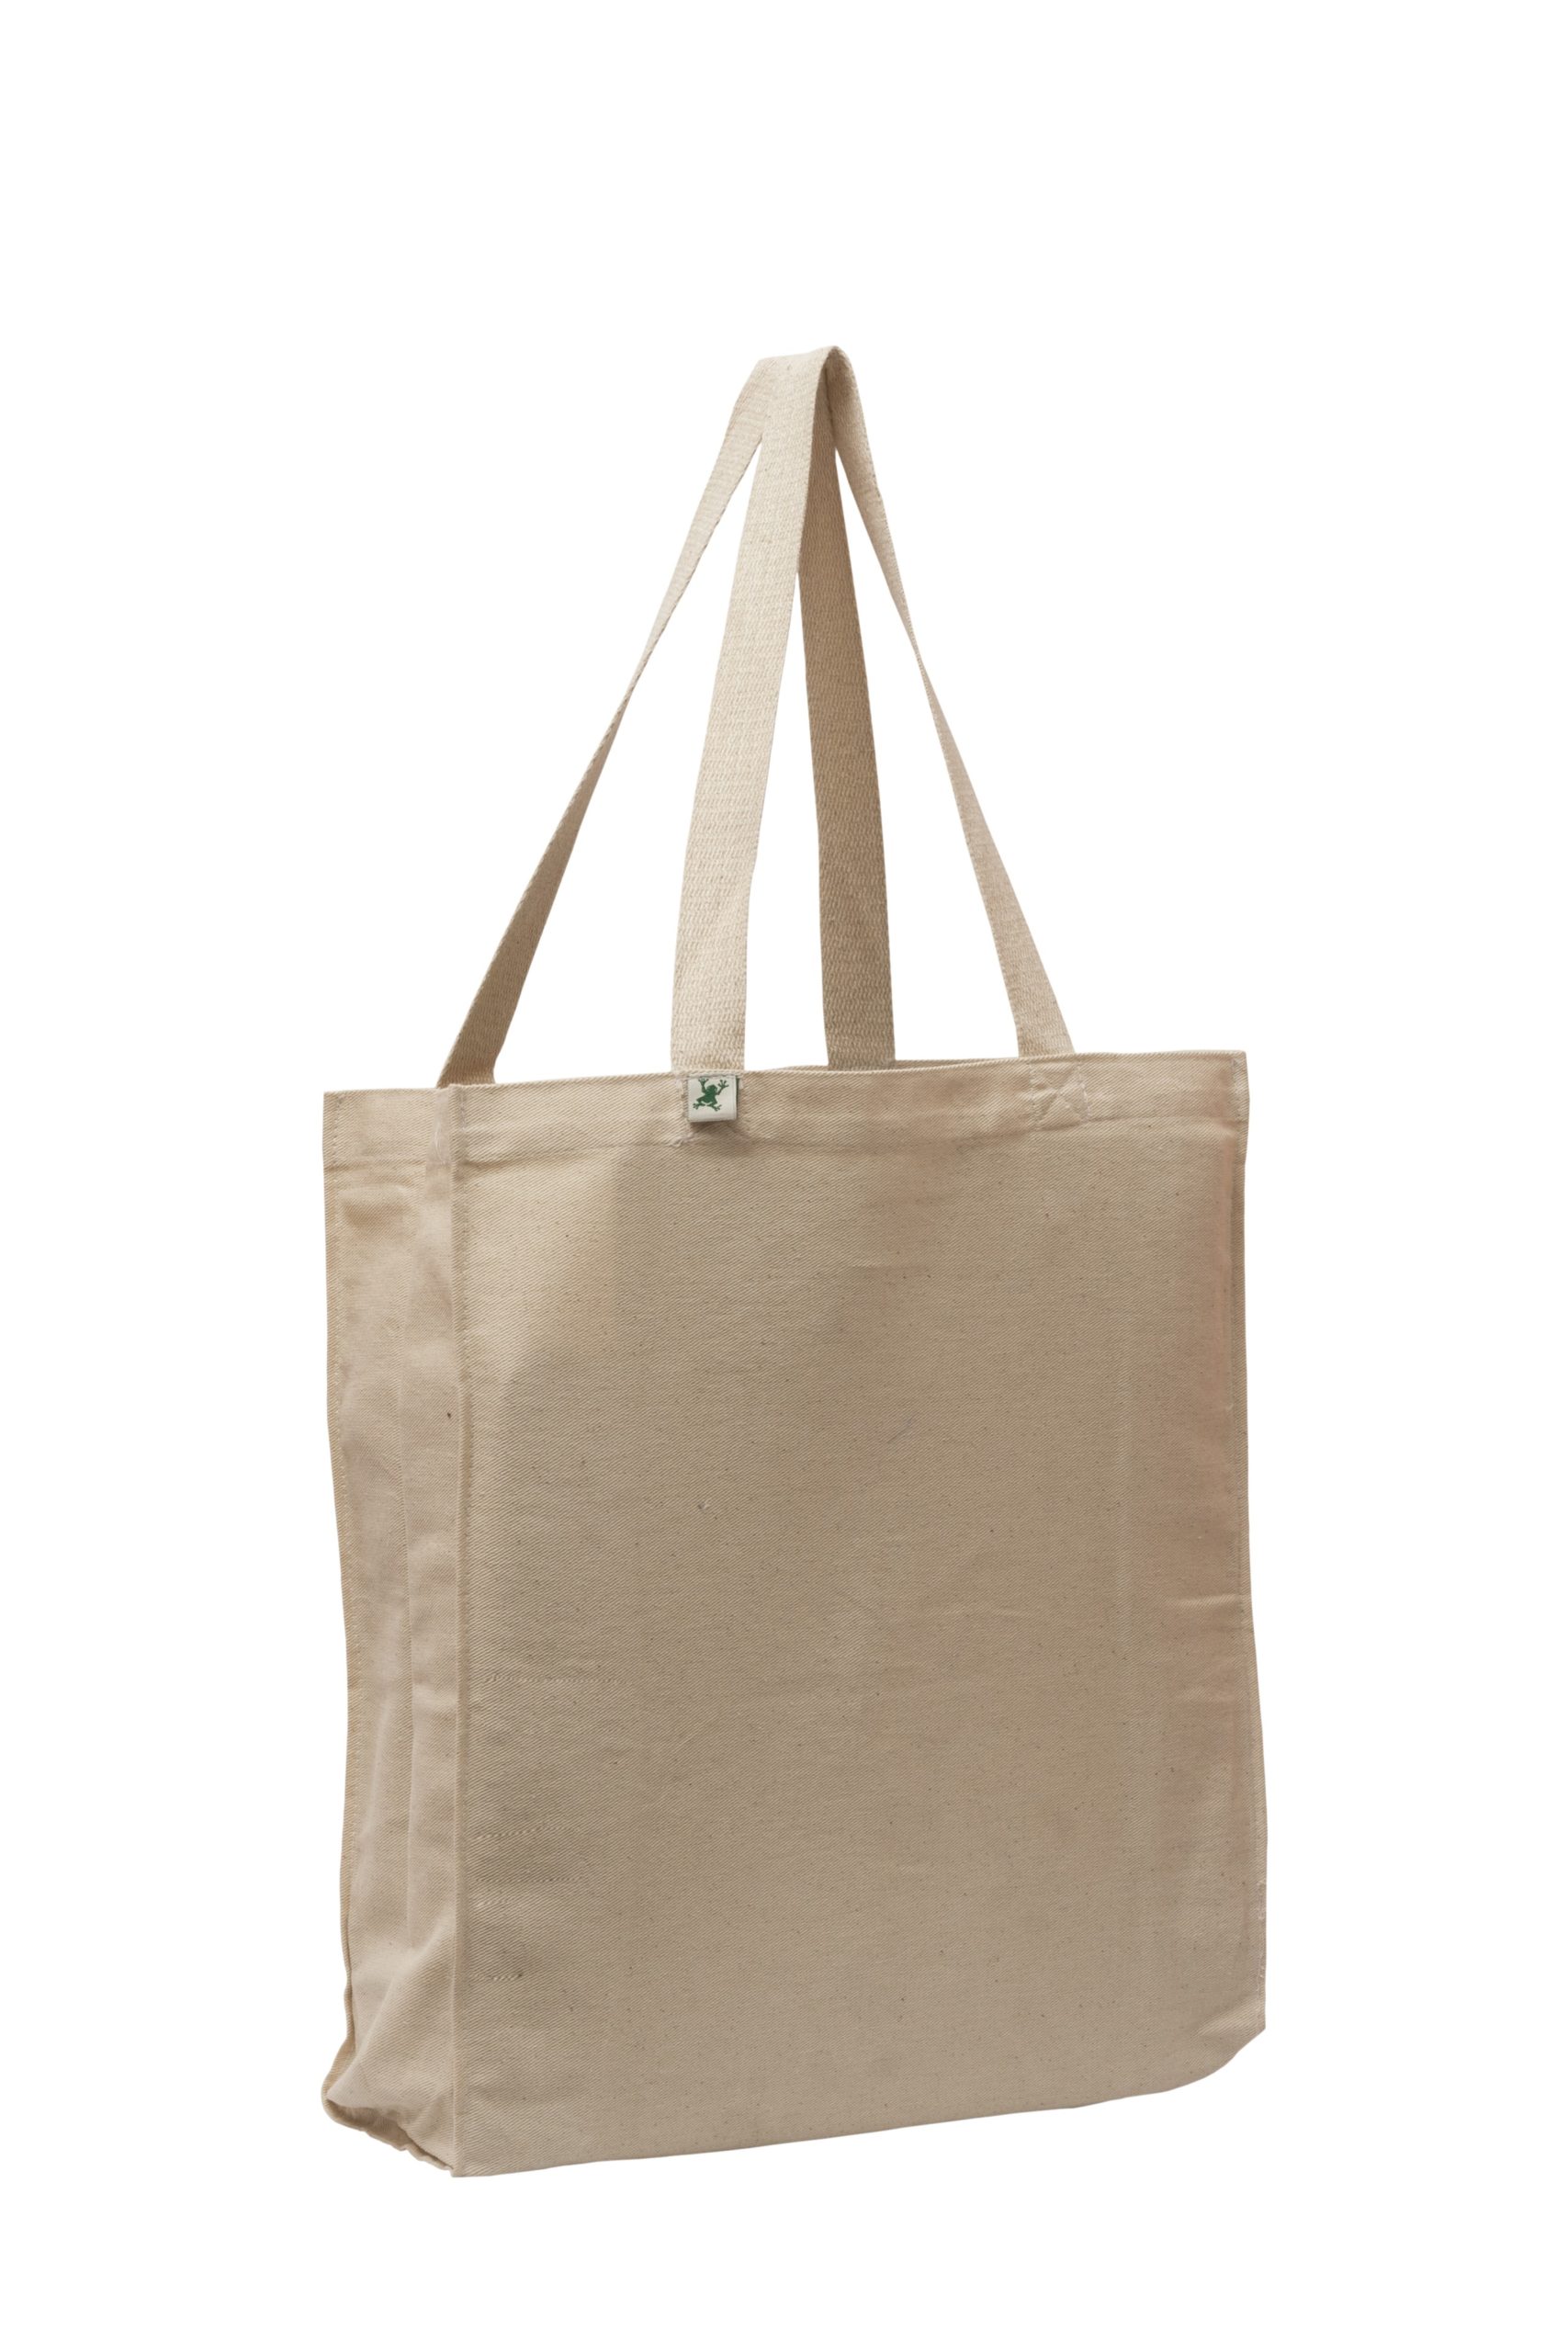 Thick Canvas Tote | eCoexist